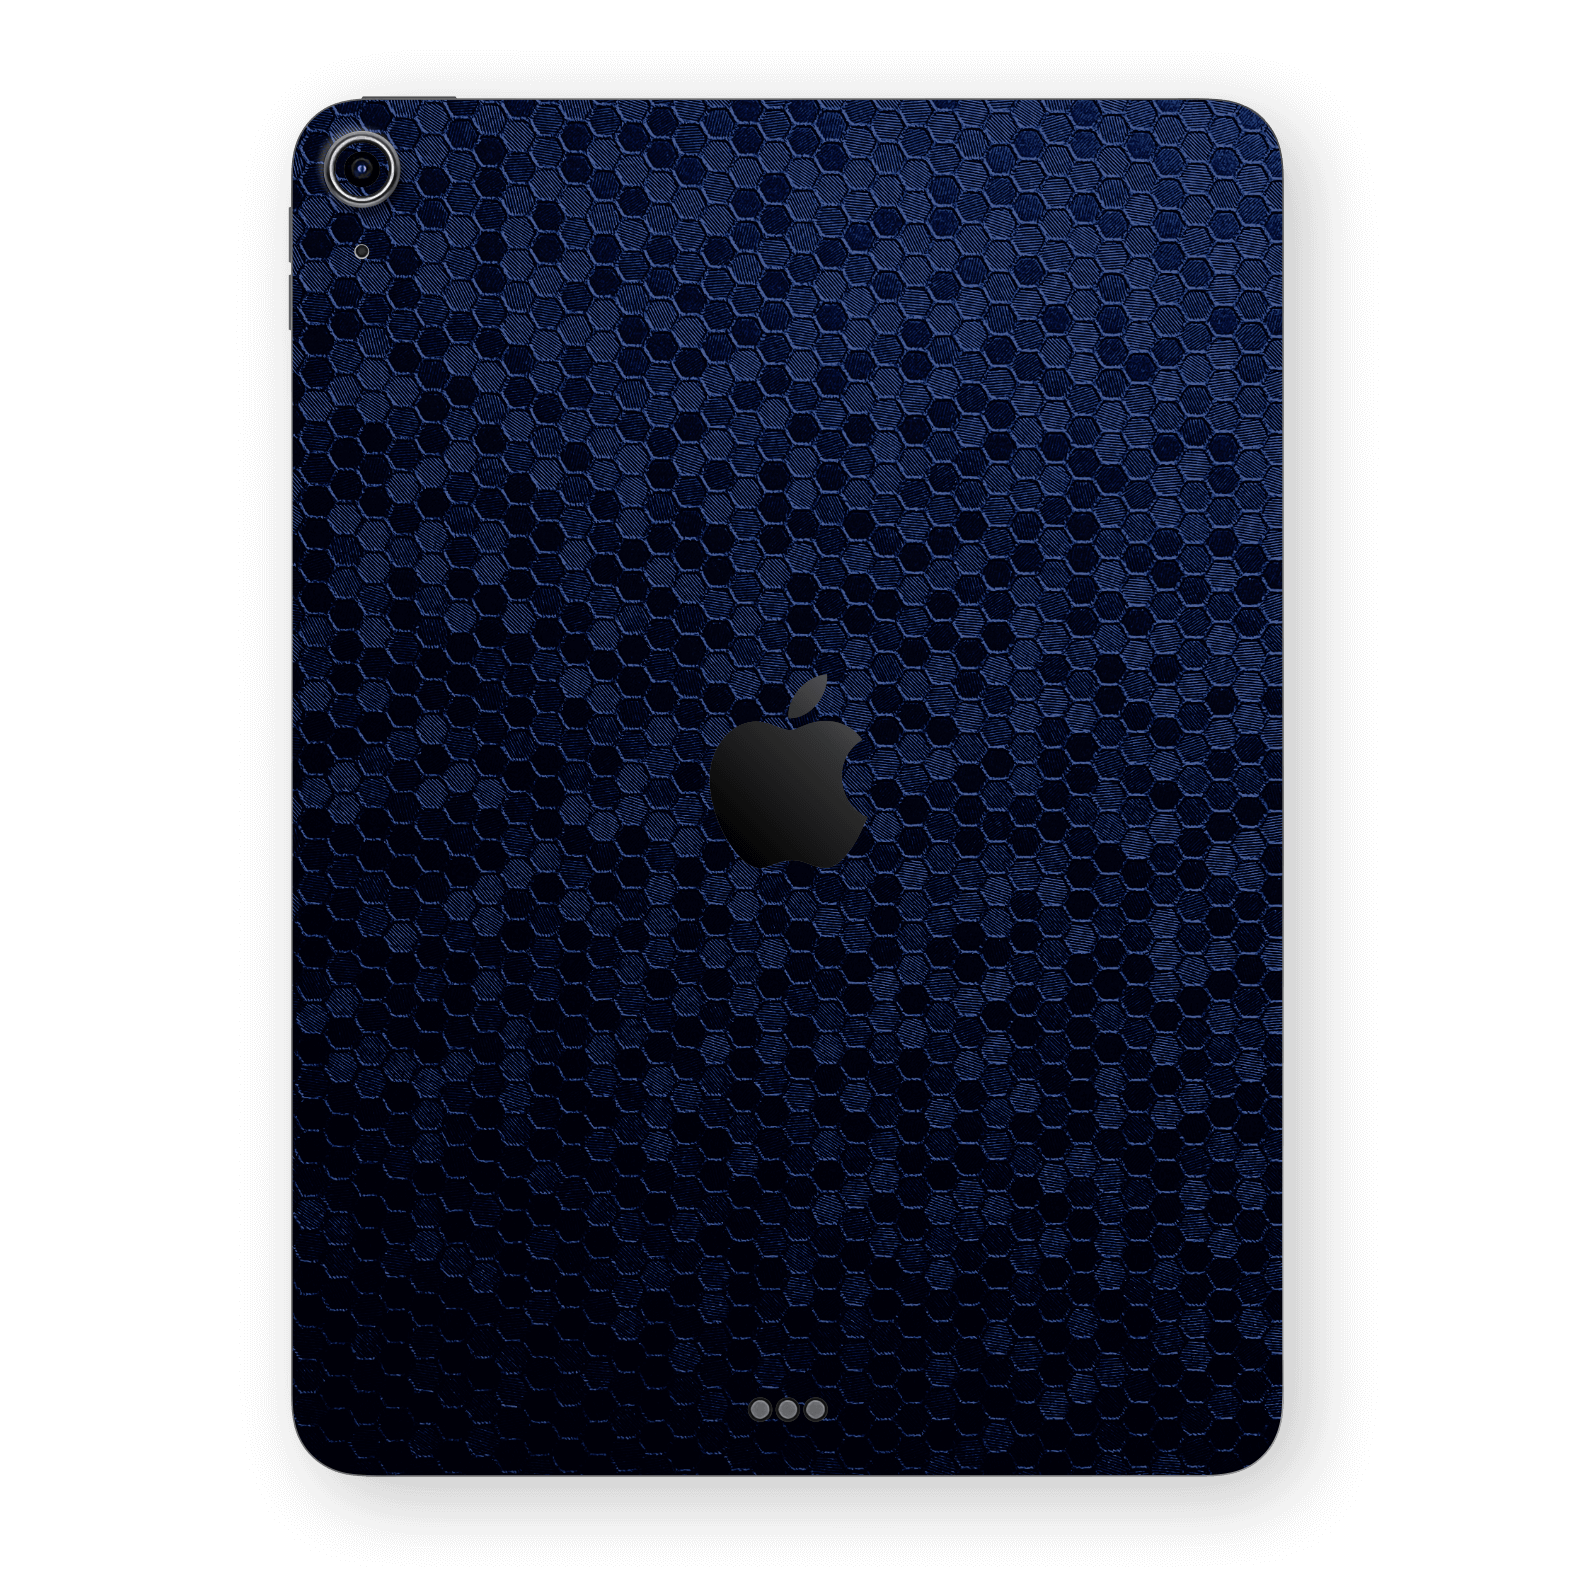 iPad Air 11” (M2) Luxuria Navy Blue Honeycomb 3D Textured Skin Wrap Sticker Decal Cover Protector by QSKINZ | qskinz.com